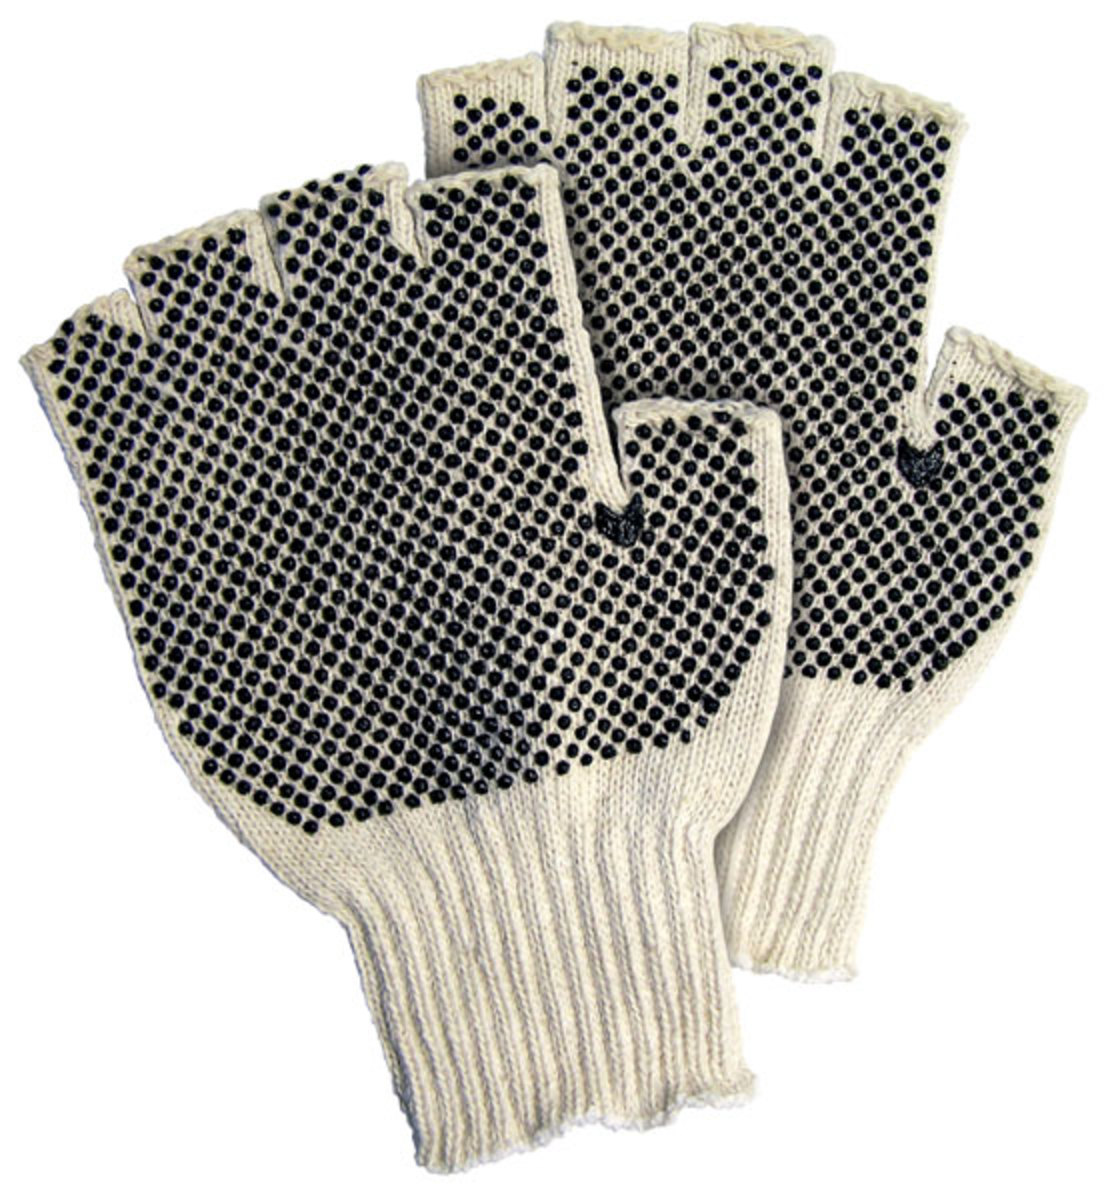 Memphis Glove Natural And Brown Large 7 Gauge Cotton And Polyester String Knit Fingerless Work Gloves With Knit Wrist